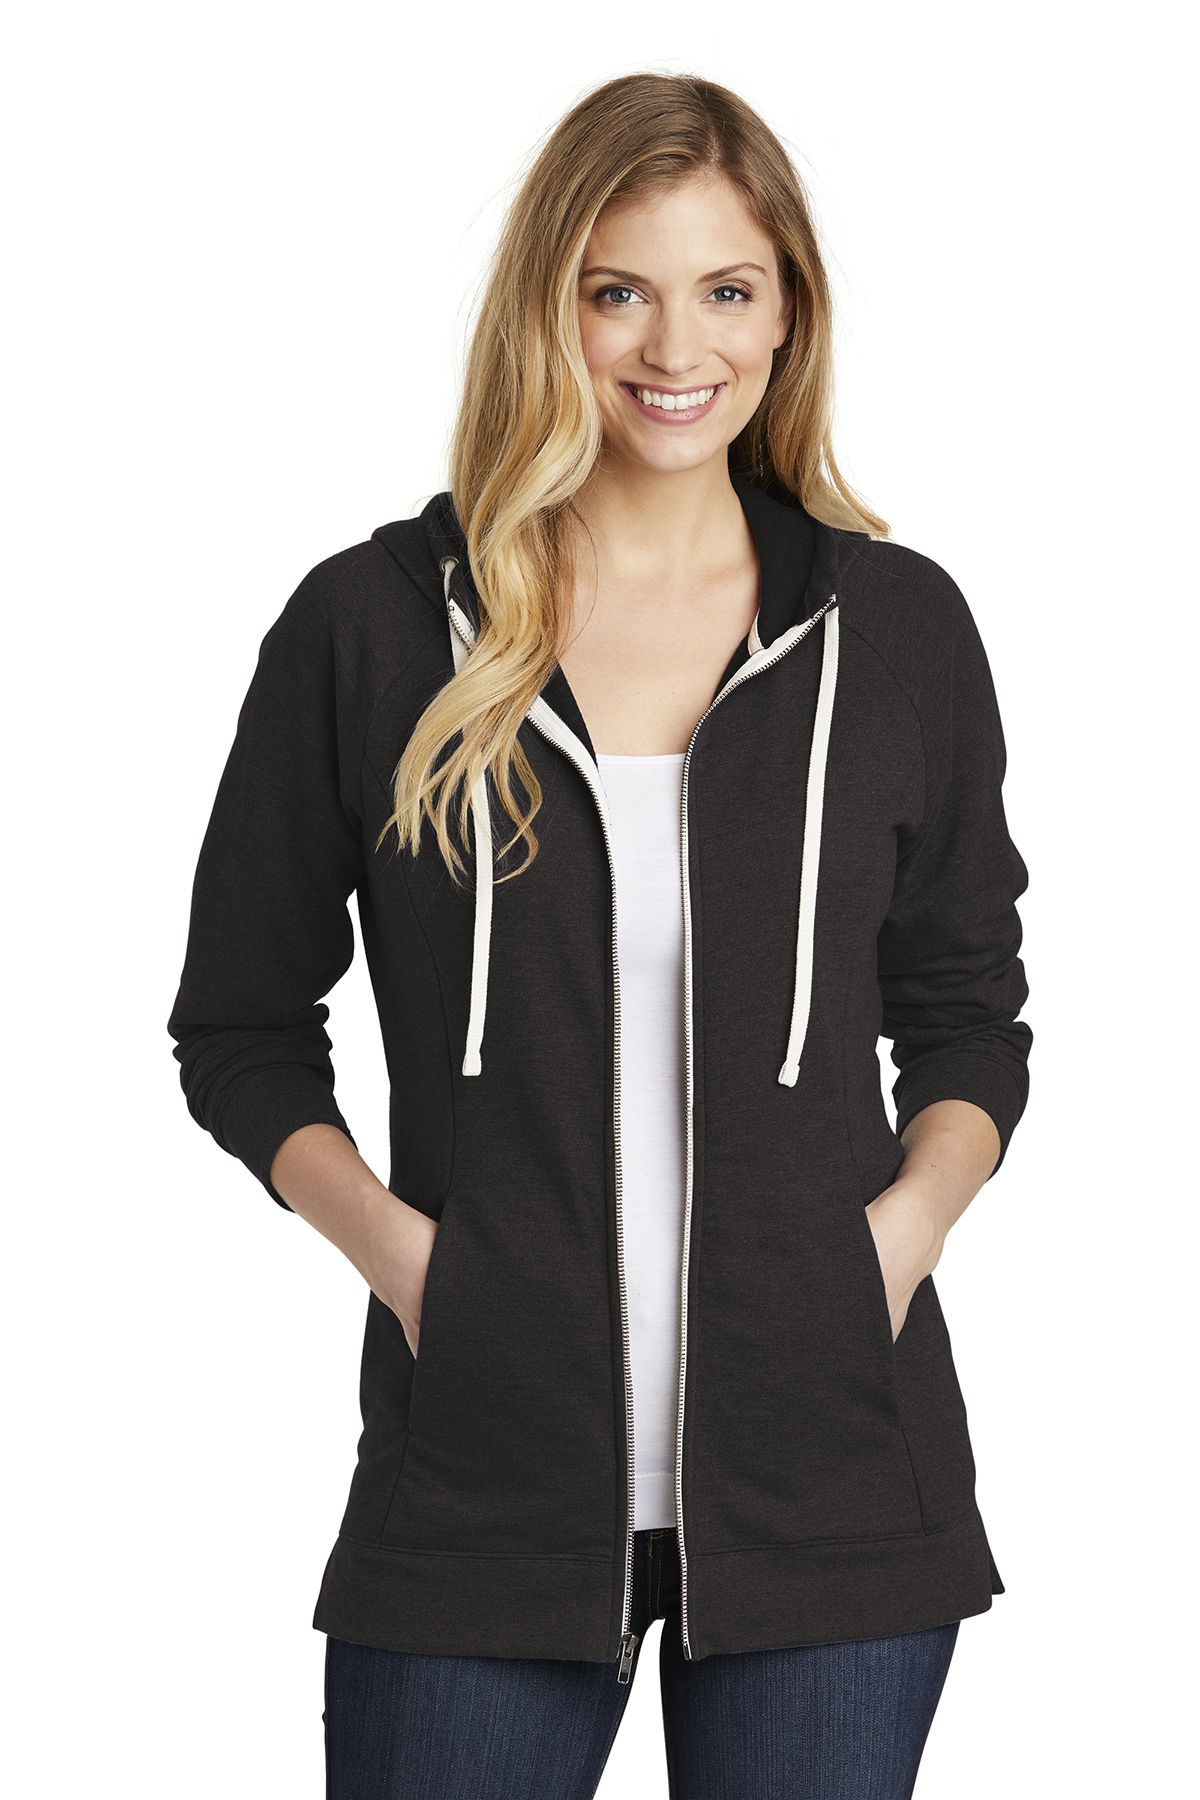 District ® Women’s Perfect Tri ® French Terry Full-Zip Hoodie